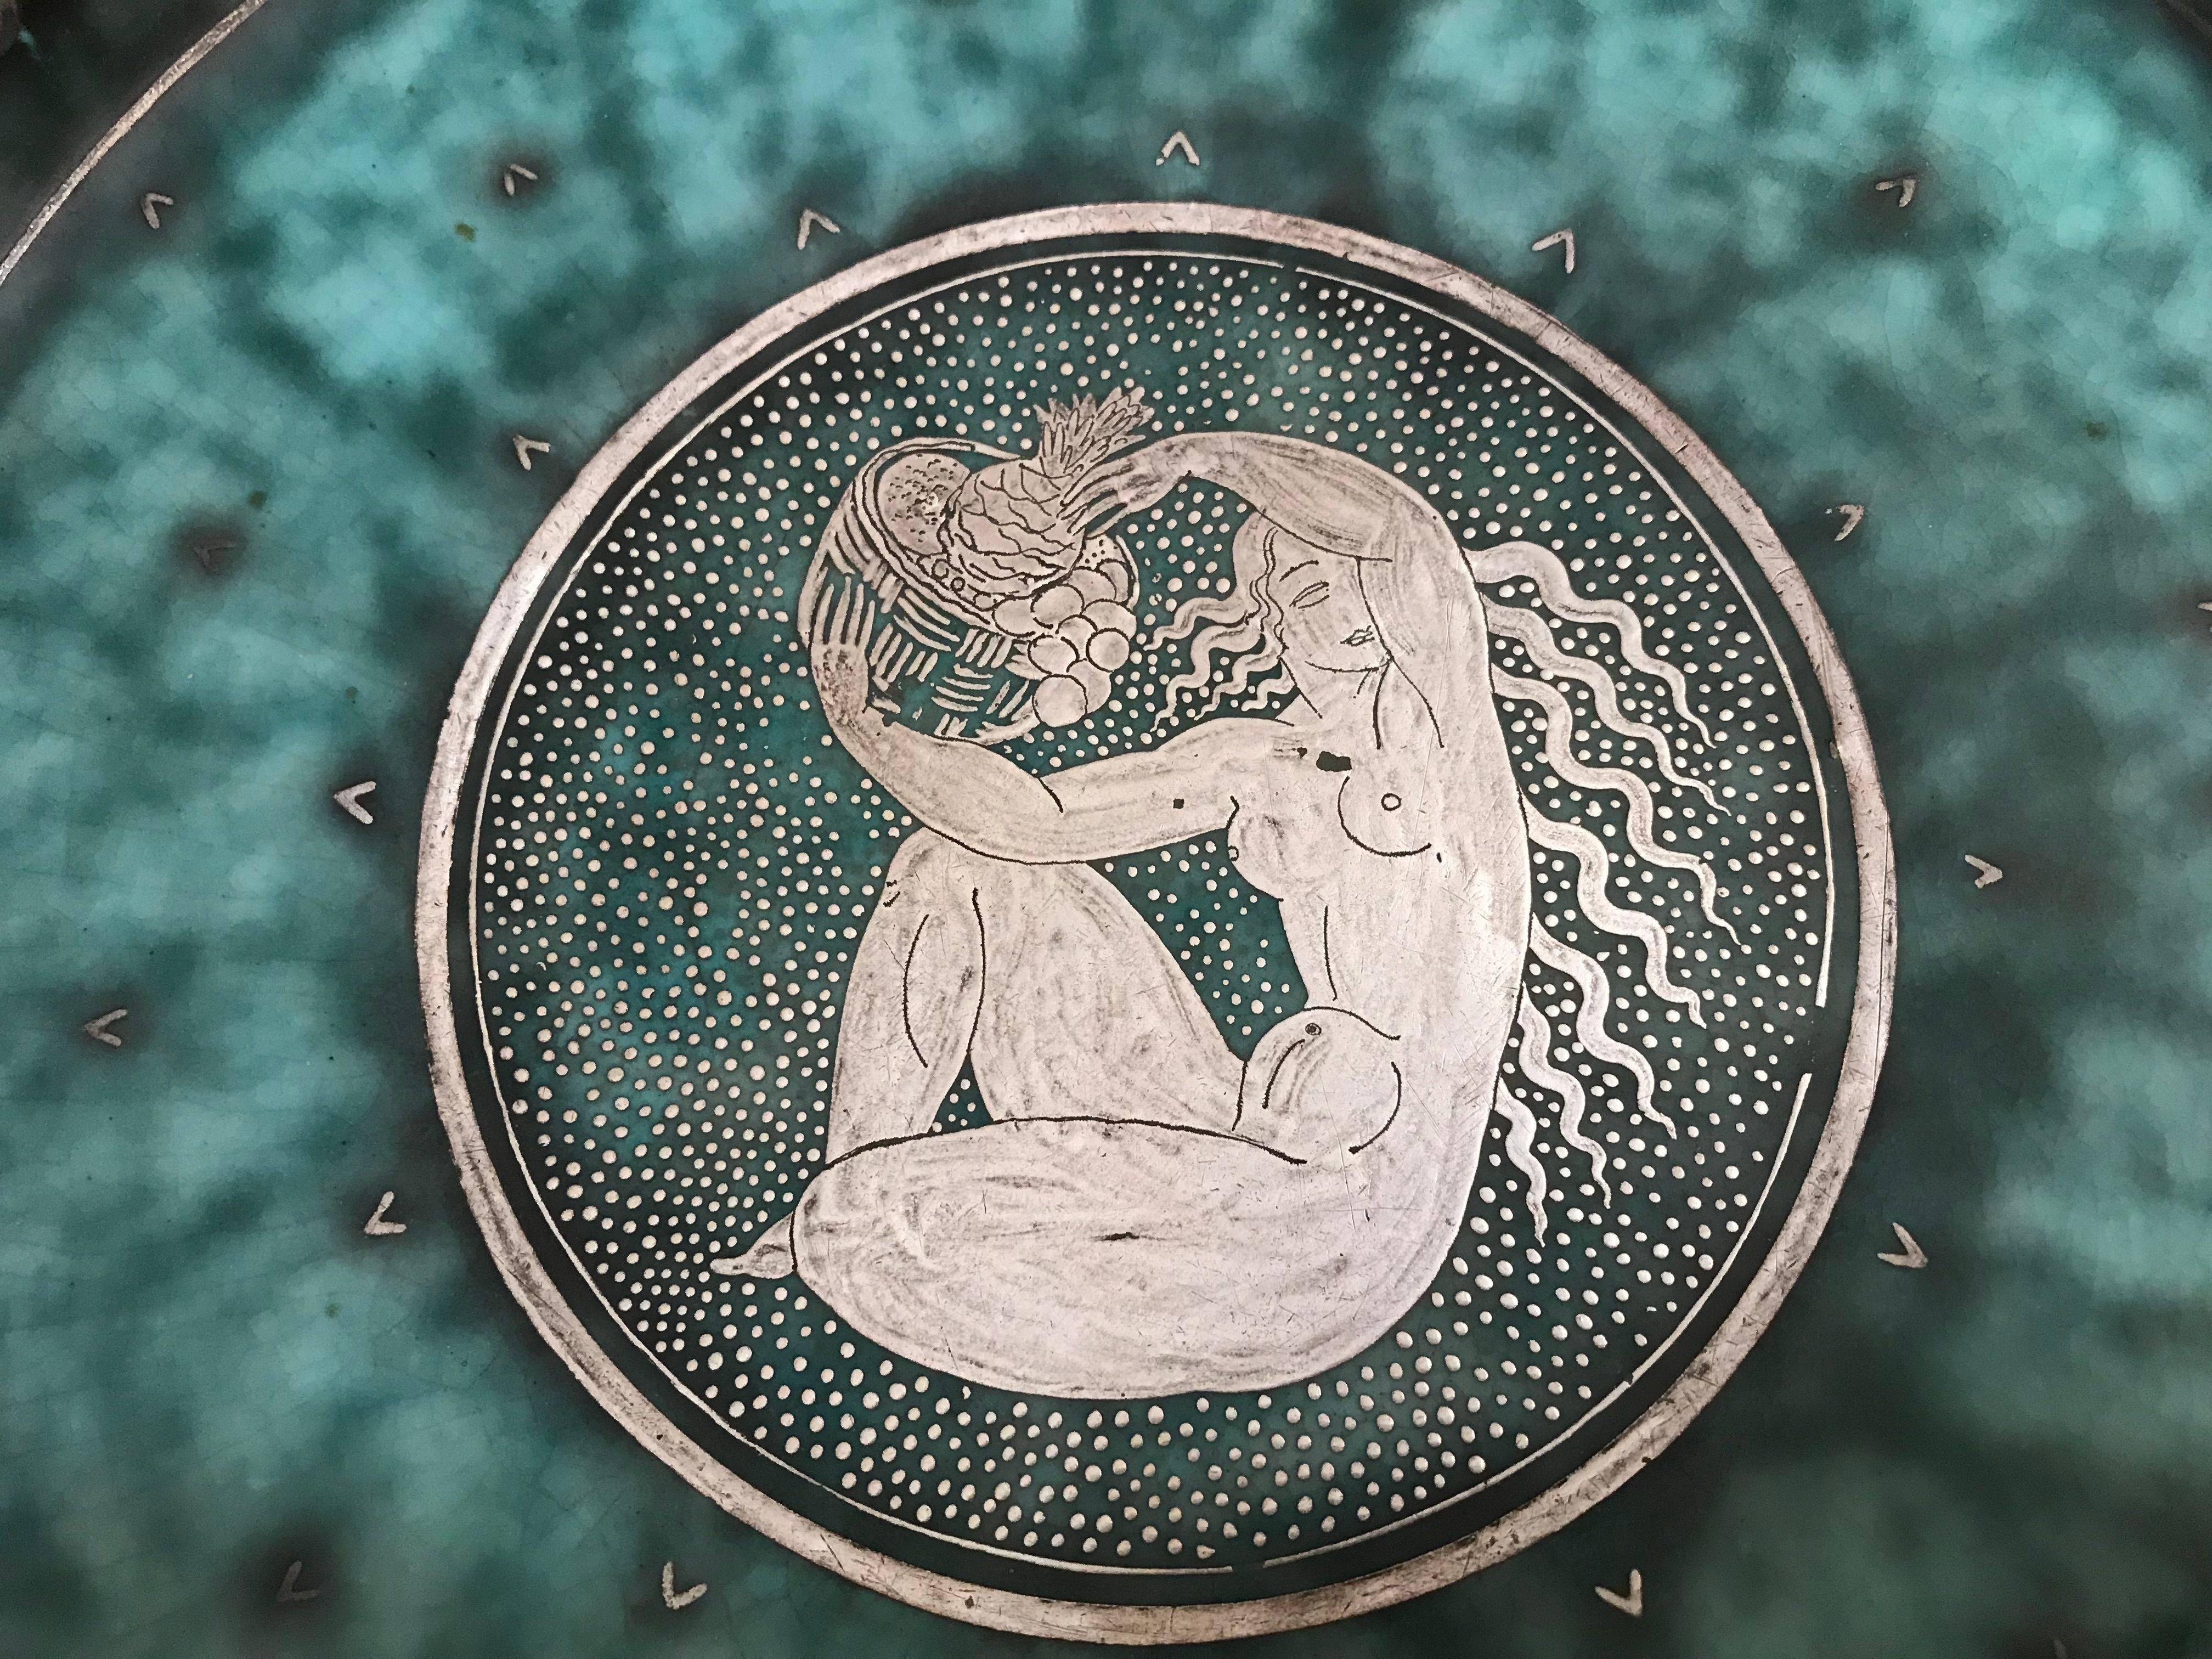 Art Deco Argenta dish with silver decoration depicting a classical Art Deco female figure. Designed by Wilhelm Kage for Gustavsberg Sweden. This piece is signed in silver by Kage. This is an early piece from the series.